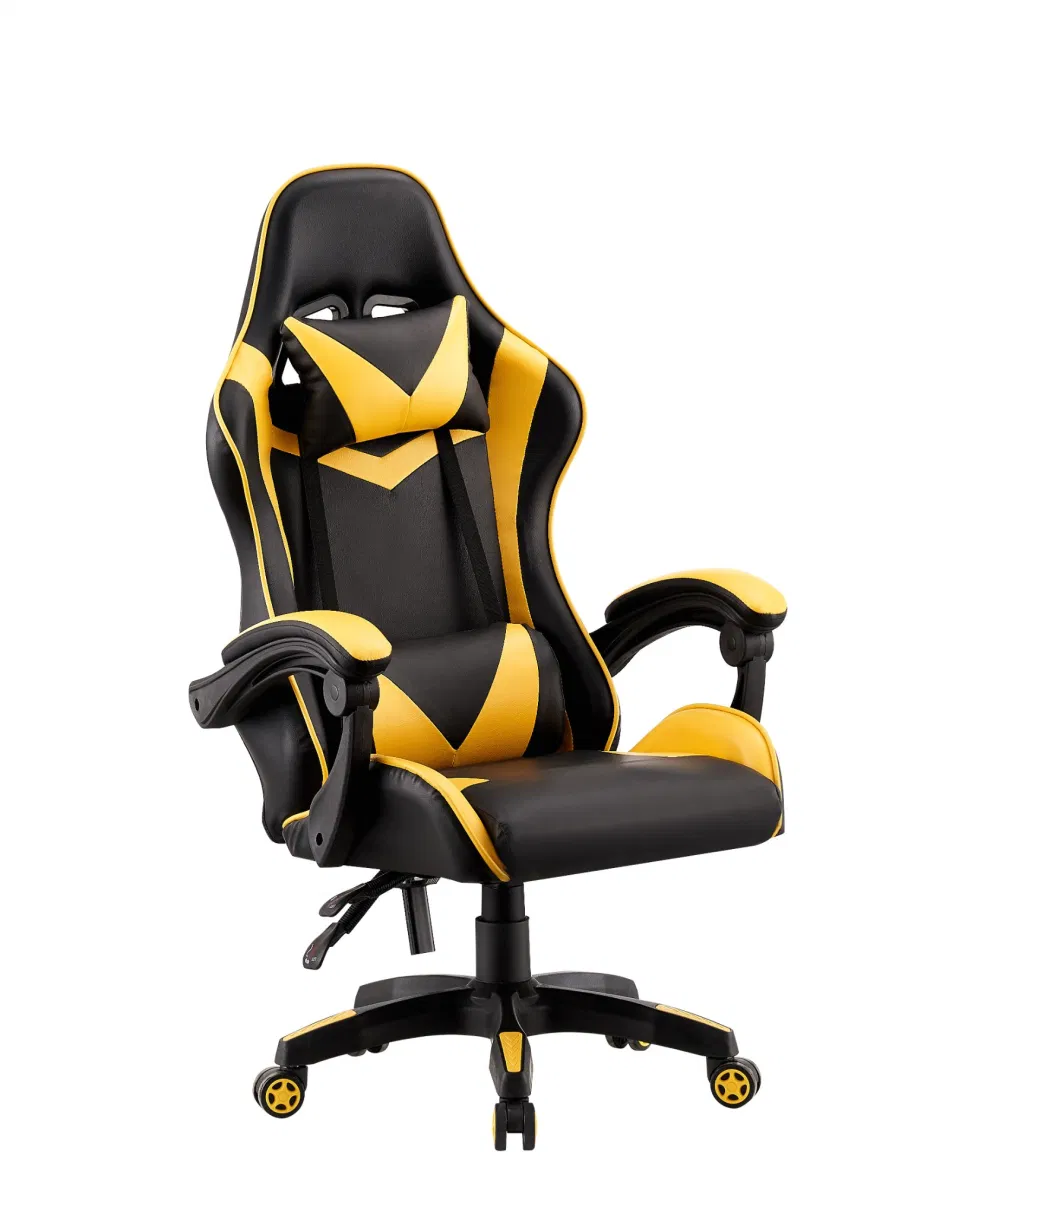 Ergonomic Gamer PU Leather Computer Recliner Racing Gaming Chair with Footrest